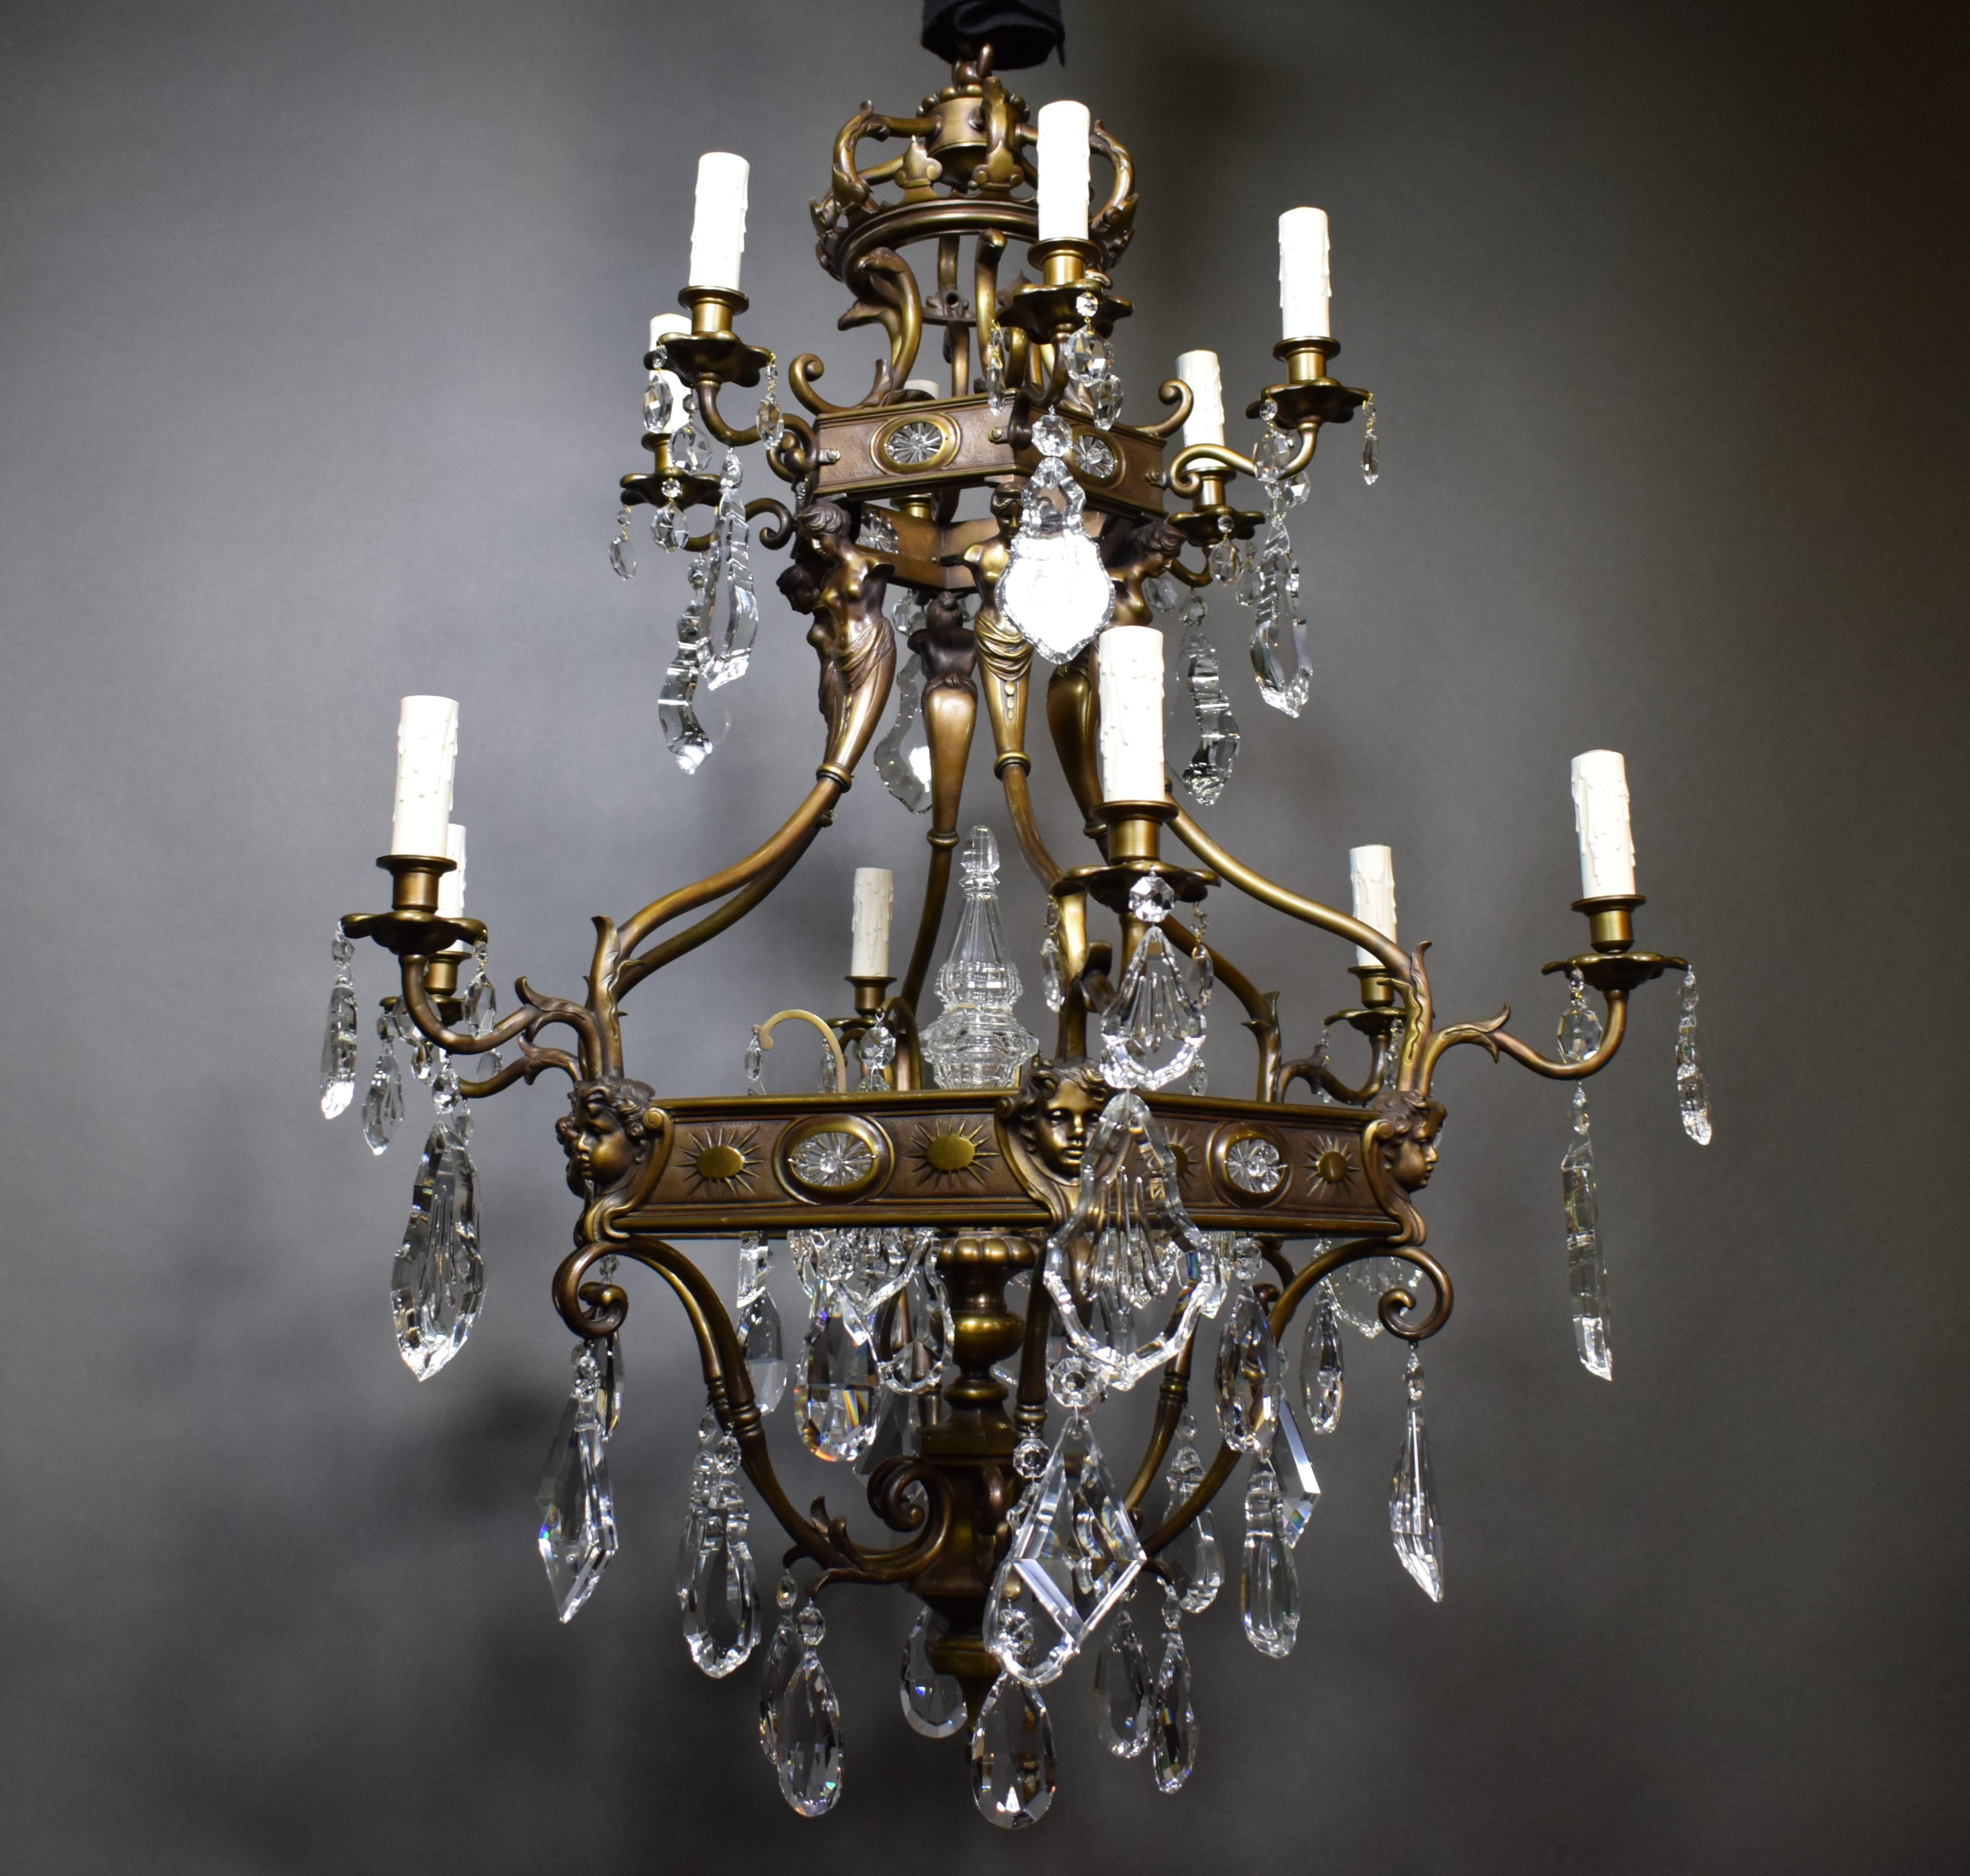 A very fine and important bronze chandelier featuring hand cut crystal pendalogues and central pyramid.
France, circa 1910. 12 lights.
Dimensions: Height 53